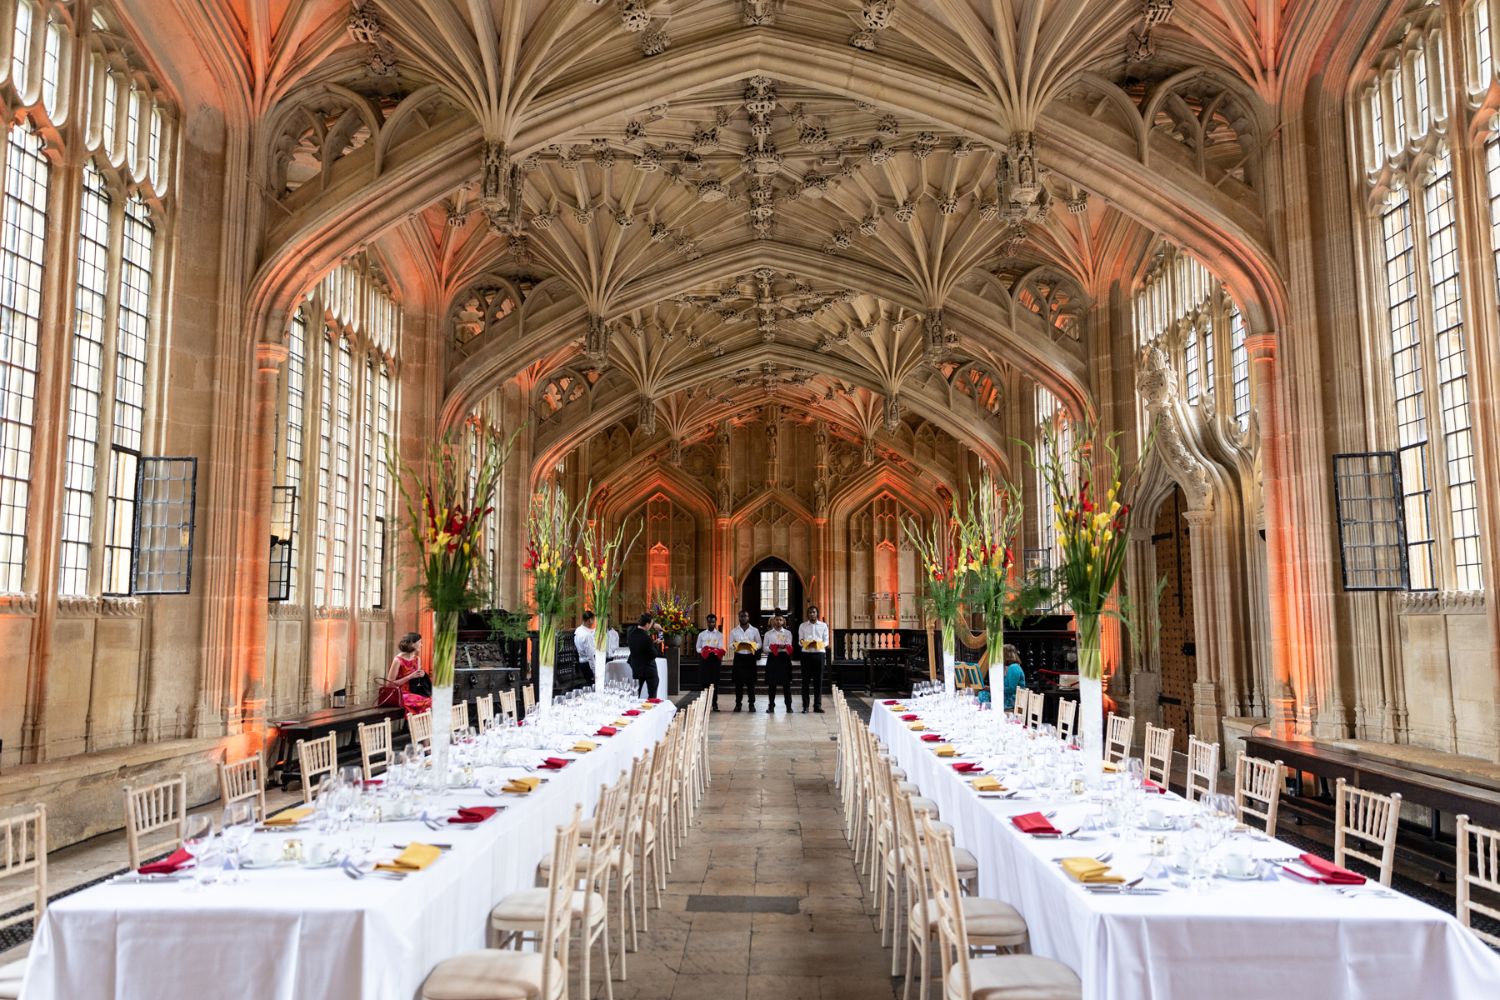 <p>VIP guests attend a dinner at the Divinity School</p>

<p><span class="reduce_font_size"><em>Image credit: Cyrus Mower Photography</em></span></p>
